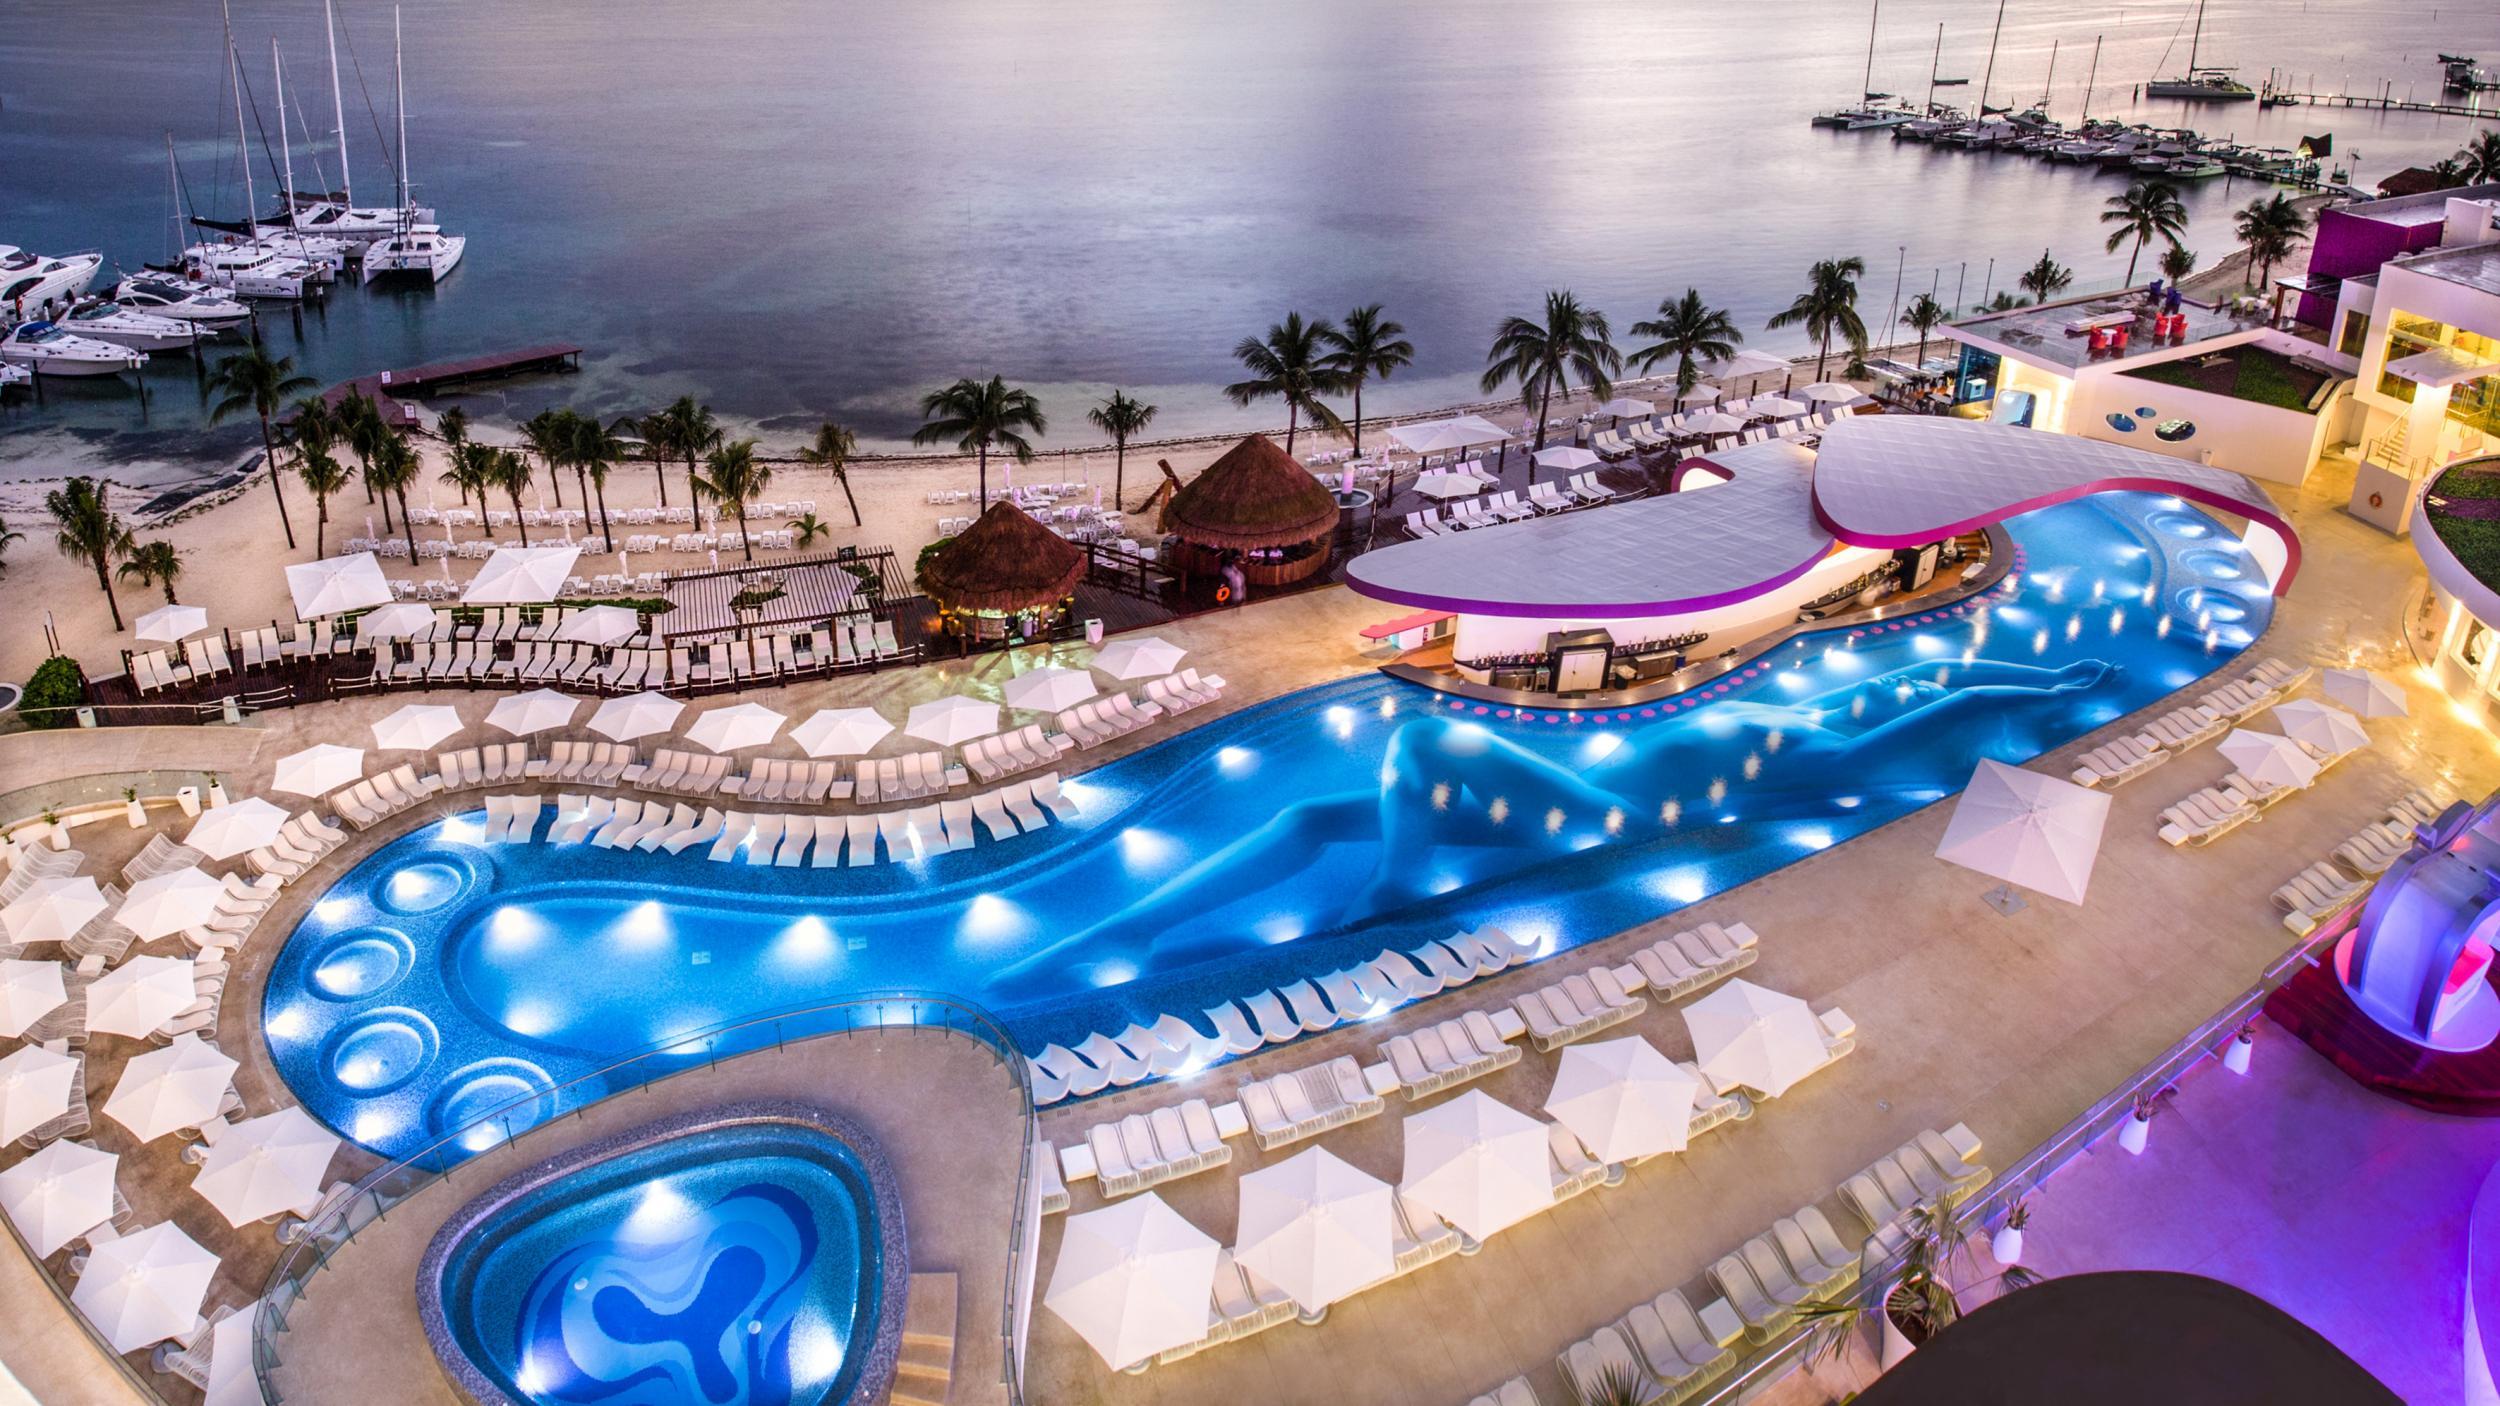 One of the "play" resorts on offer - Temptation Cancun Resort in Mexico